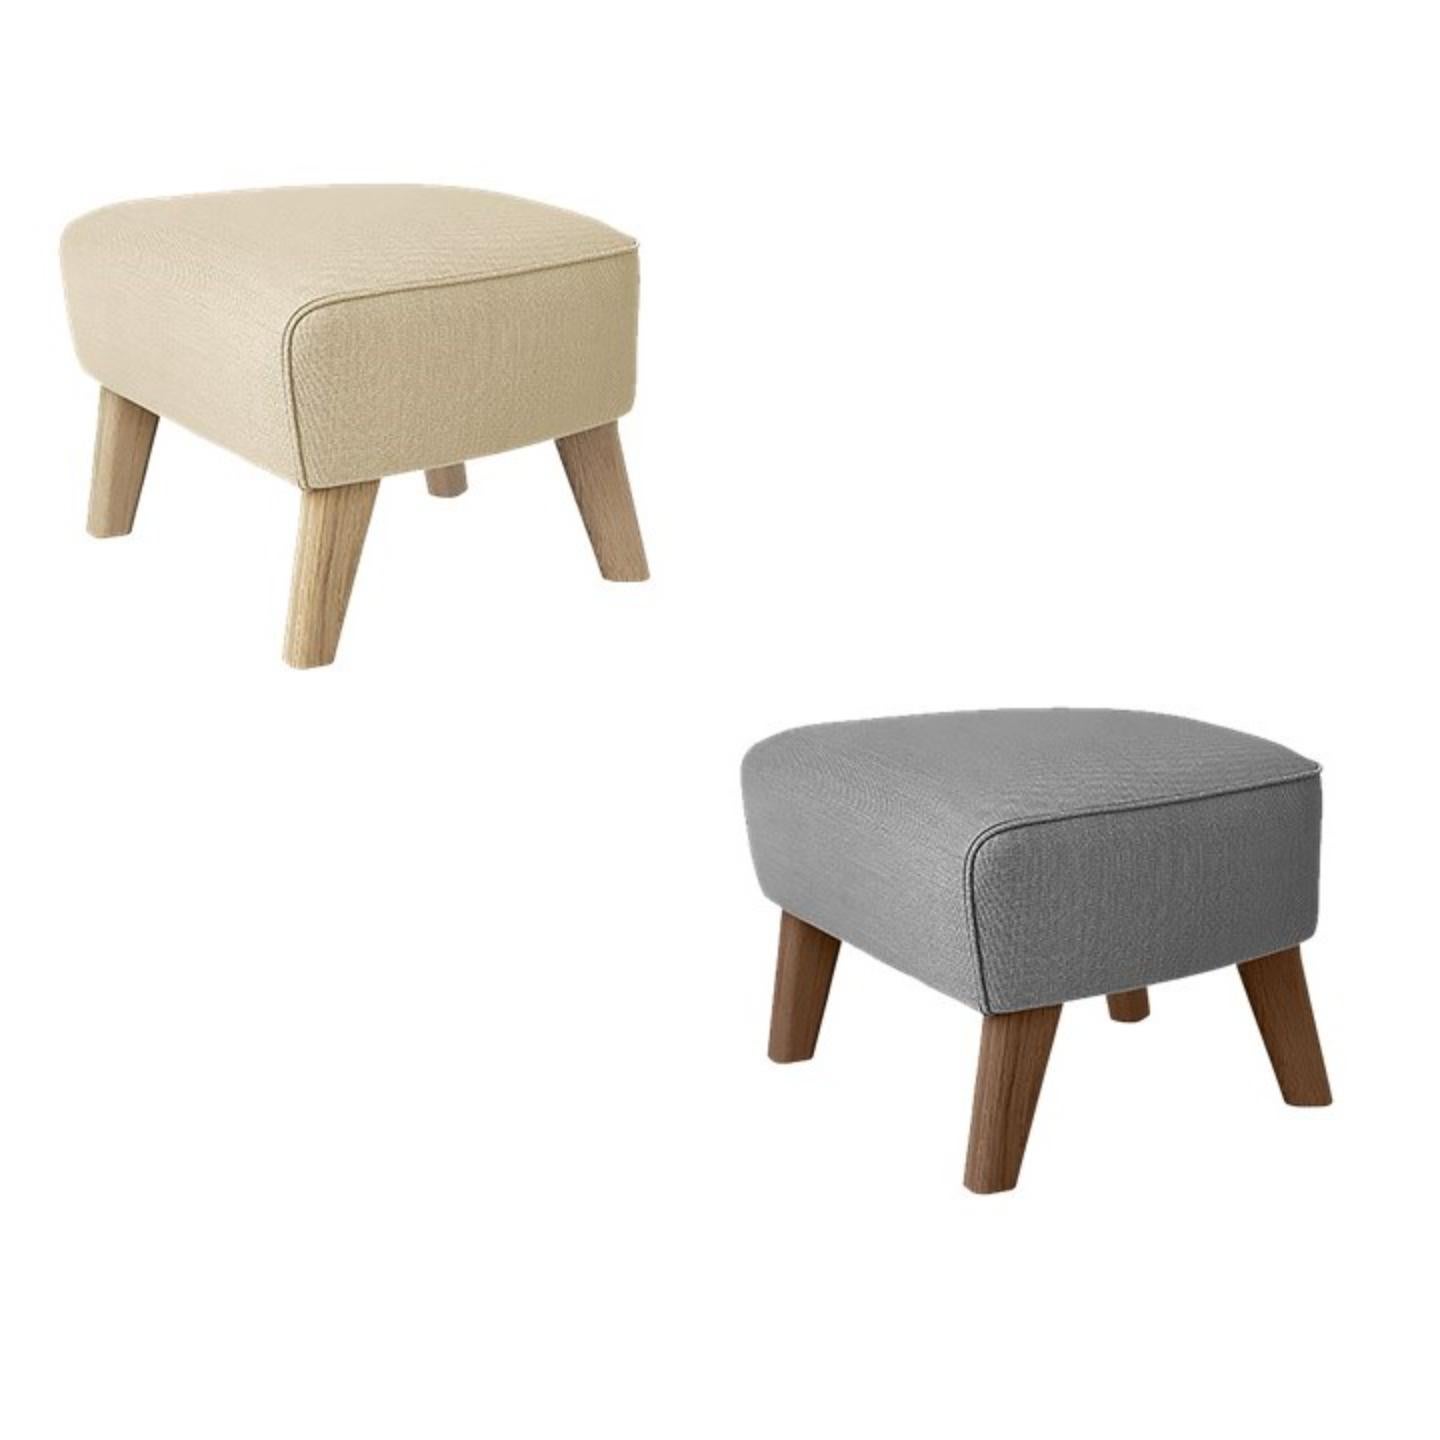 Danish Sand and Natural Oak Sahco Zero Footstool by Lassen For Sale